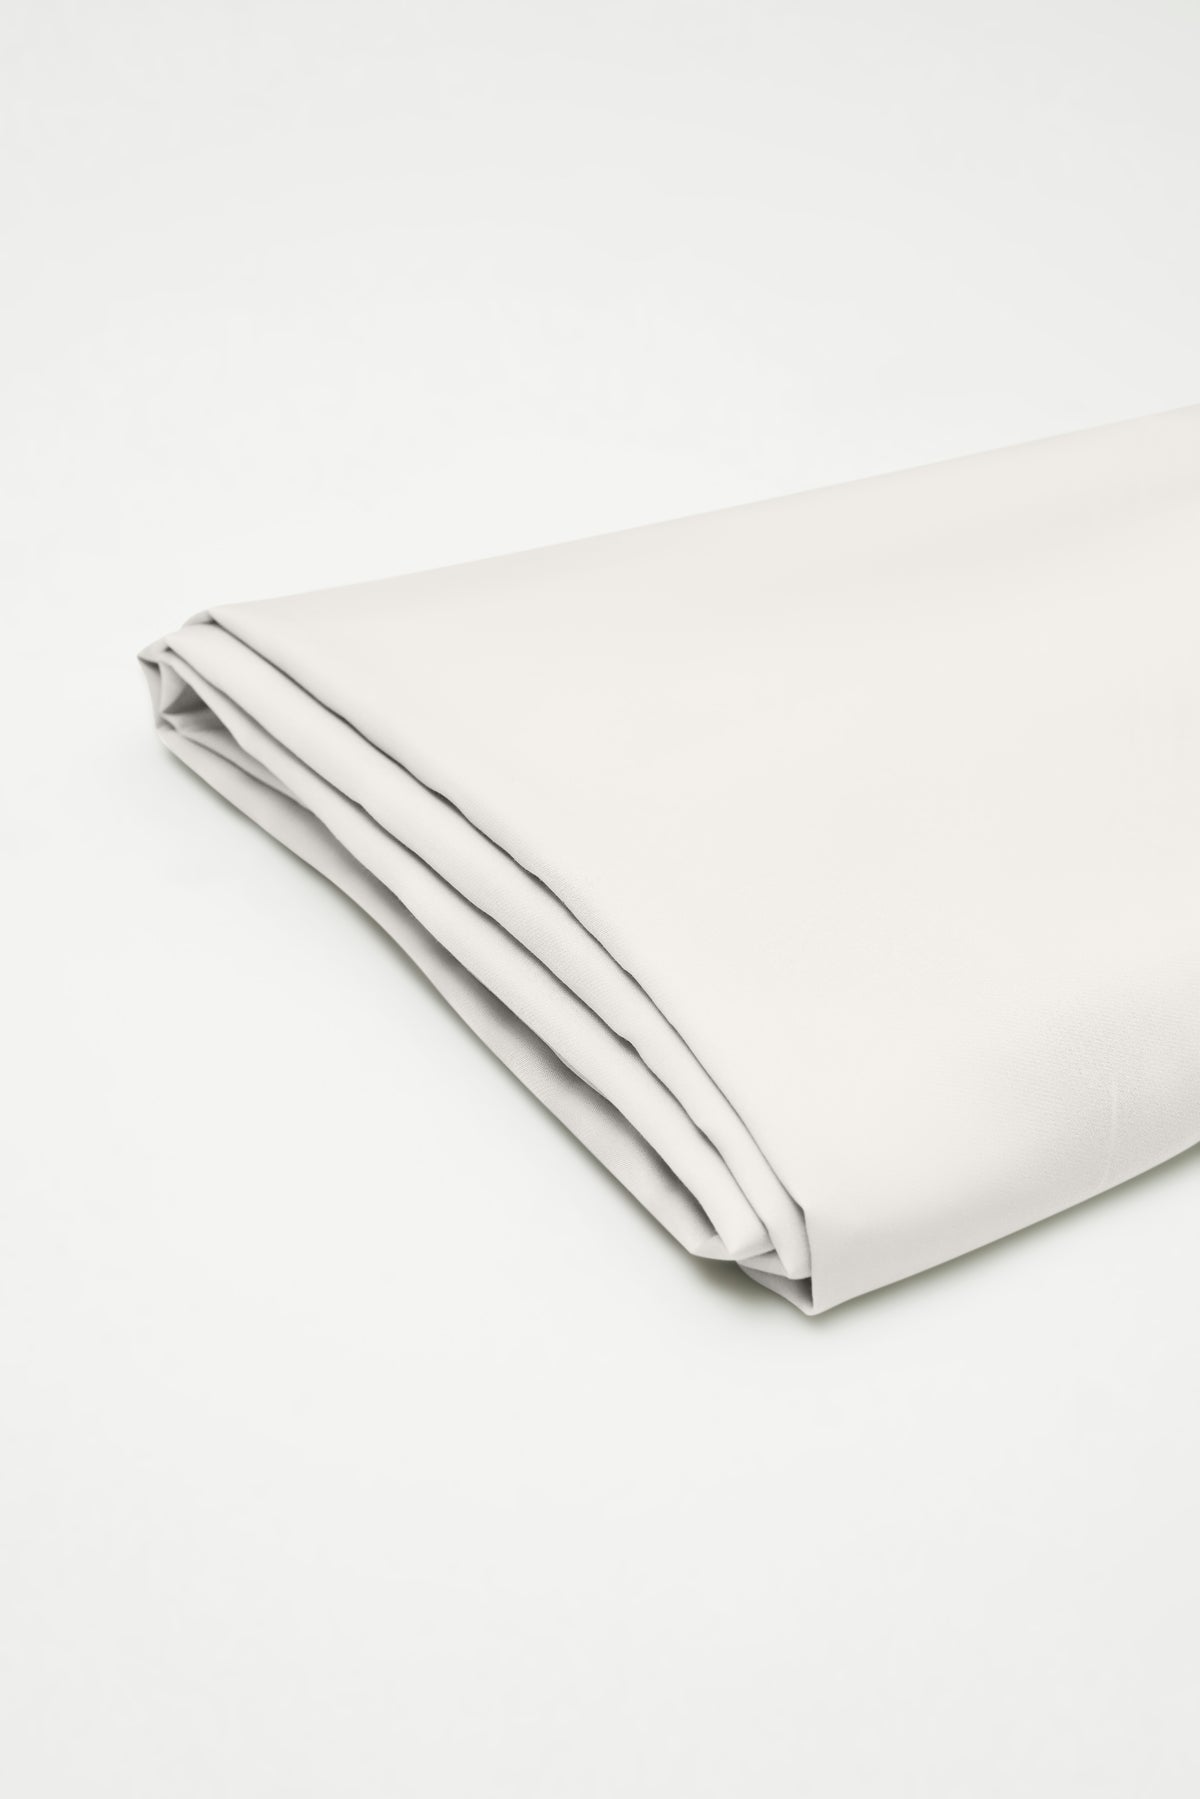 Bali, Bamboo Fitted Sheet in White